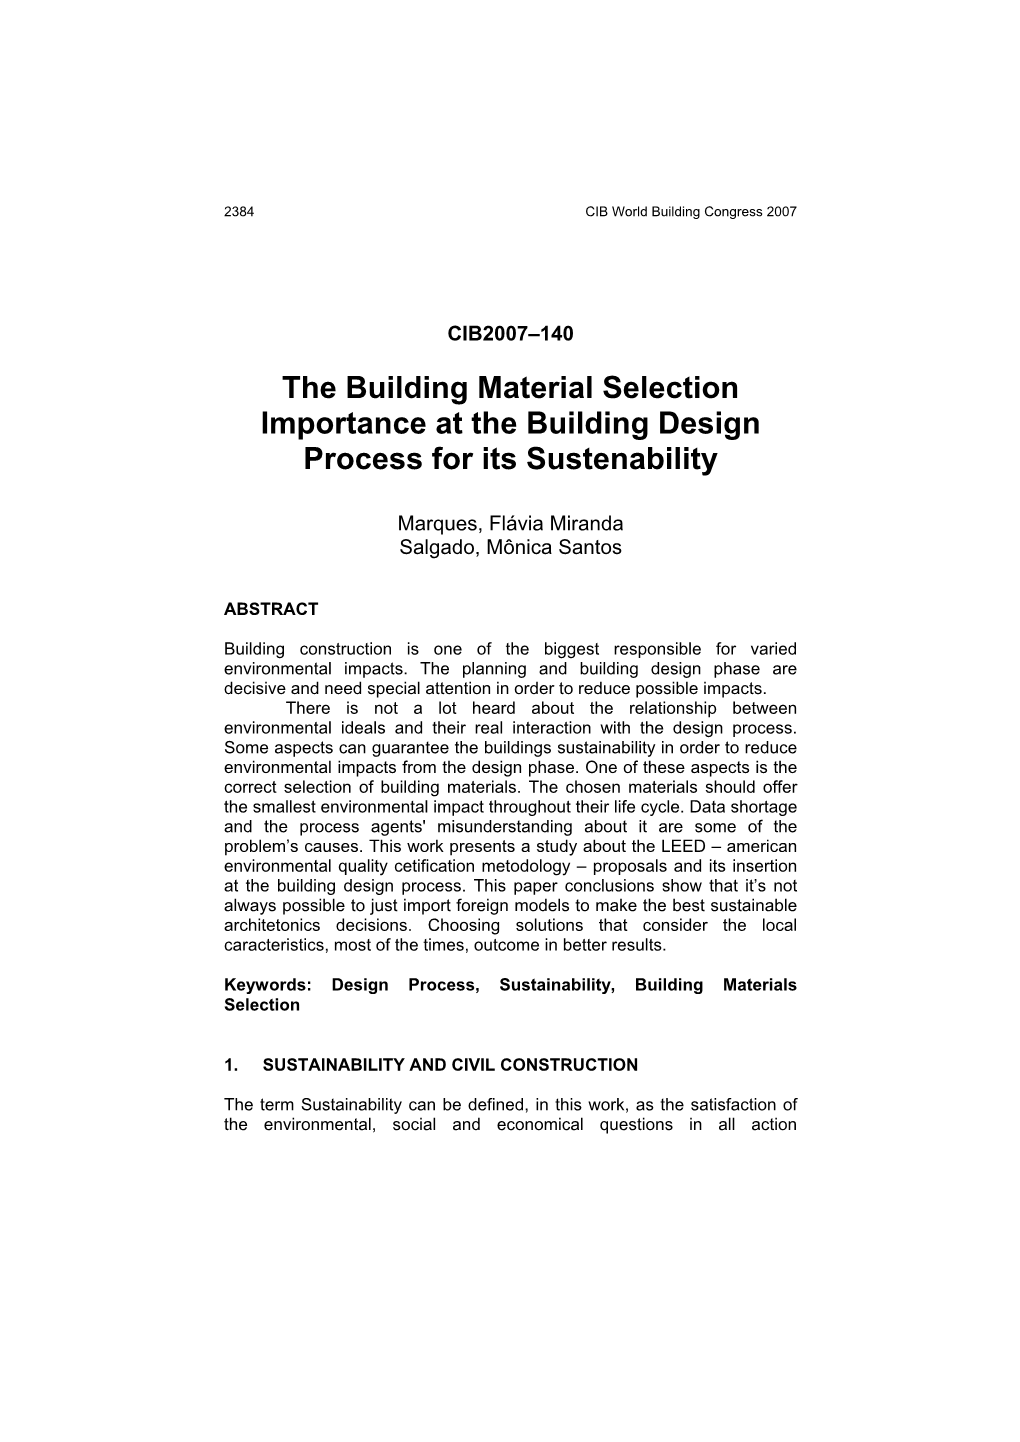 The Building Material Selection Importance at the Building Design Process for Its Sustenability